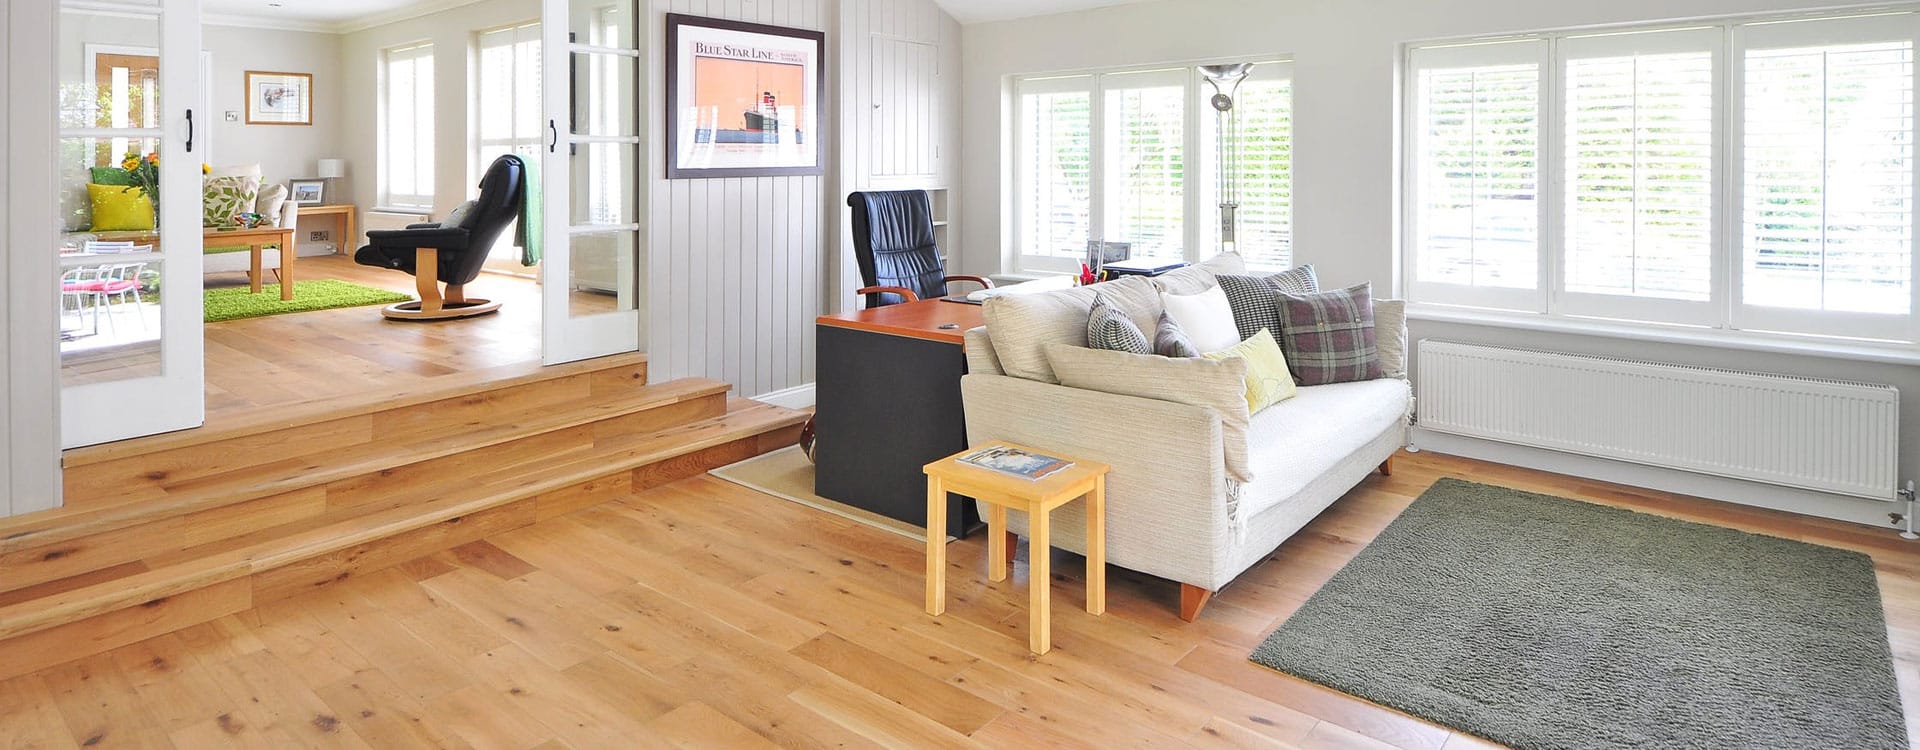 Flooring Trends For 2015- Flooring Experts in Brisbane, QLD